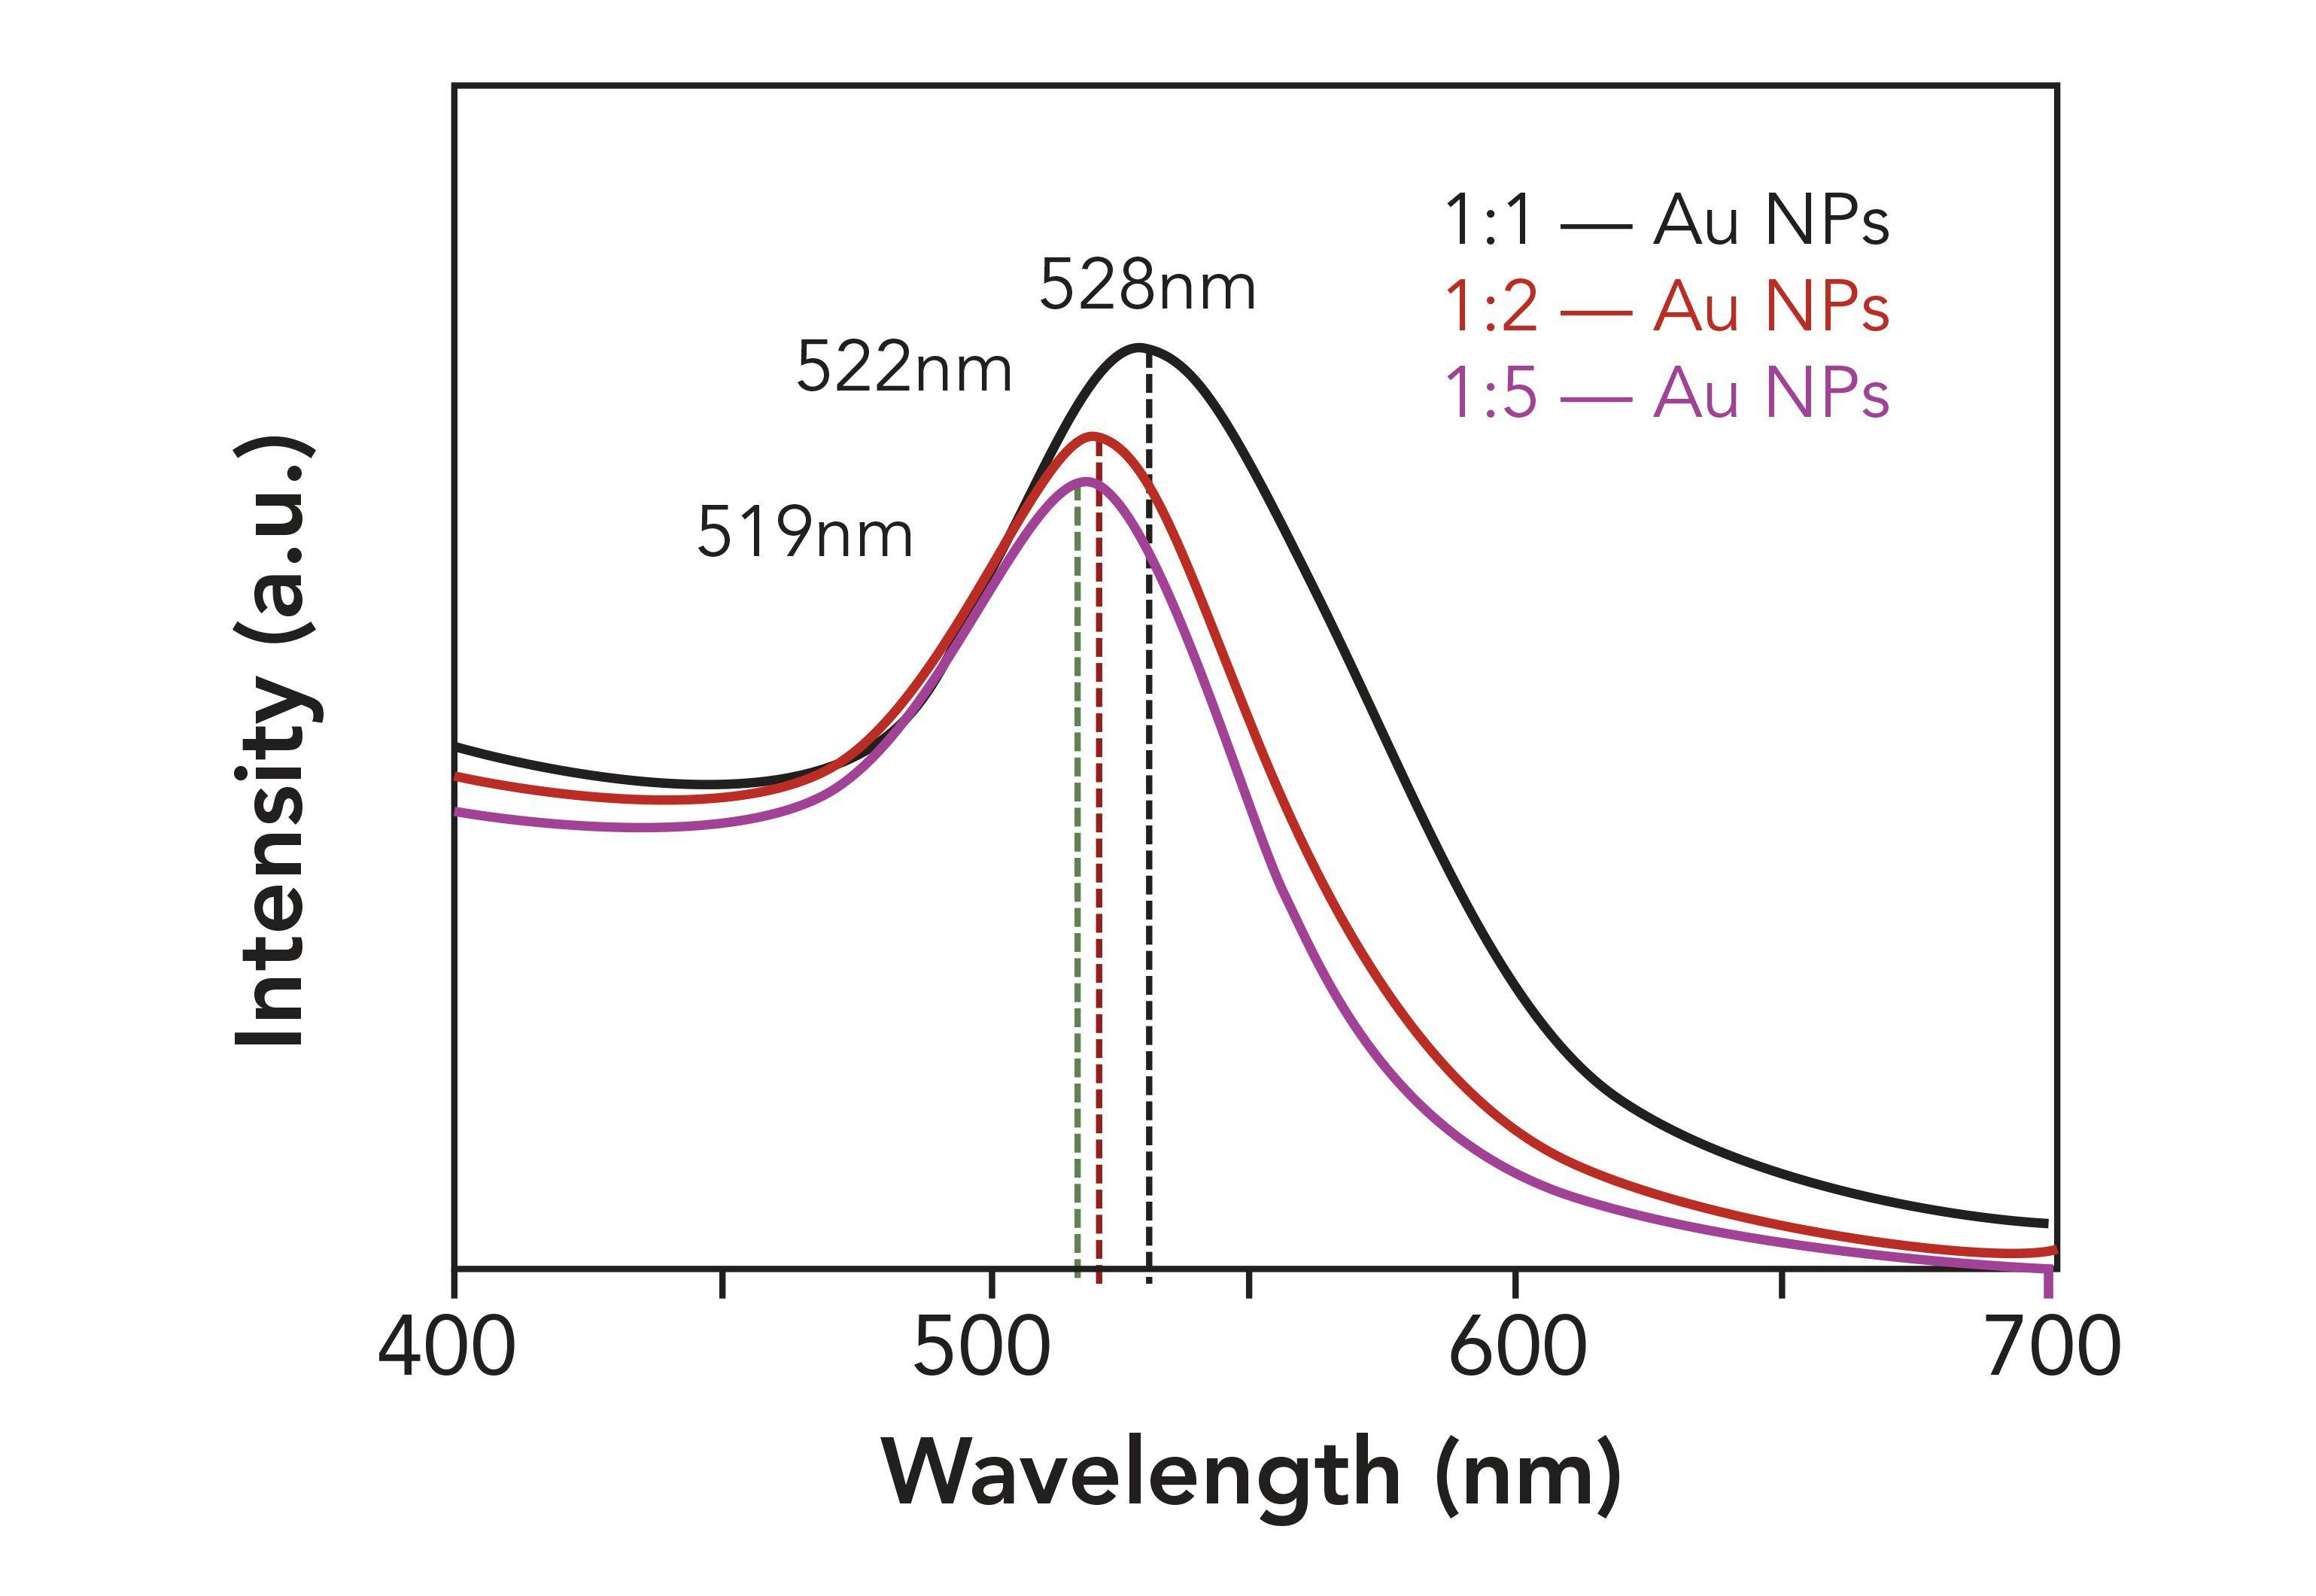 FIGURE 1: UV-vis spectra of gold nanoparticles with different sizes.